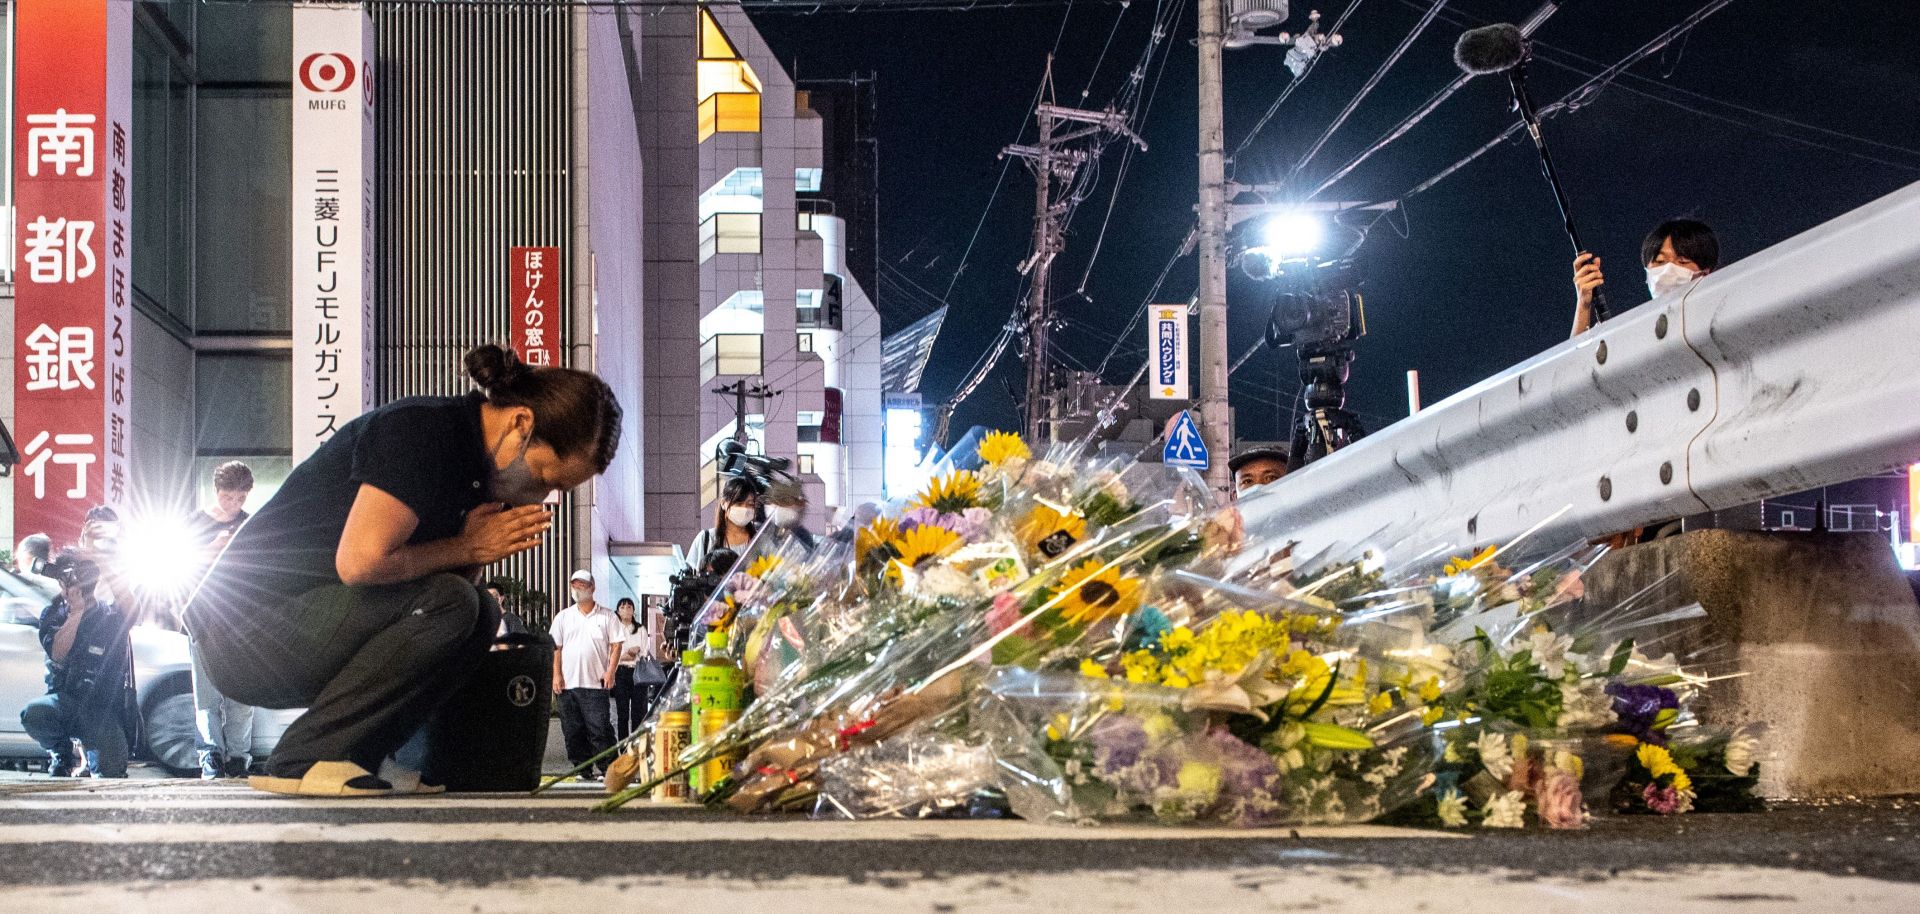 A woman mourns in front of a makeshift memorial outside the train station where former Japanese Prime Minister Shinzo Abe was shot and killed earlier in the day on July 8, 2022.